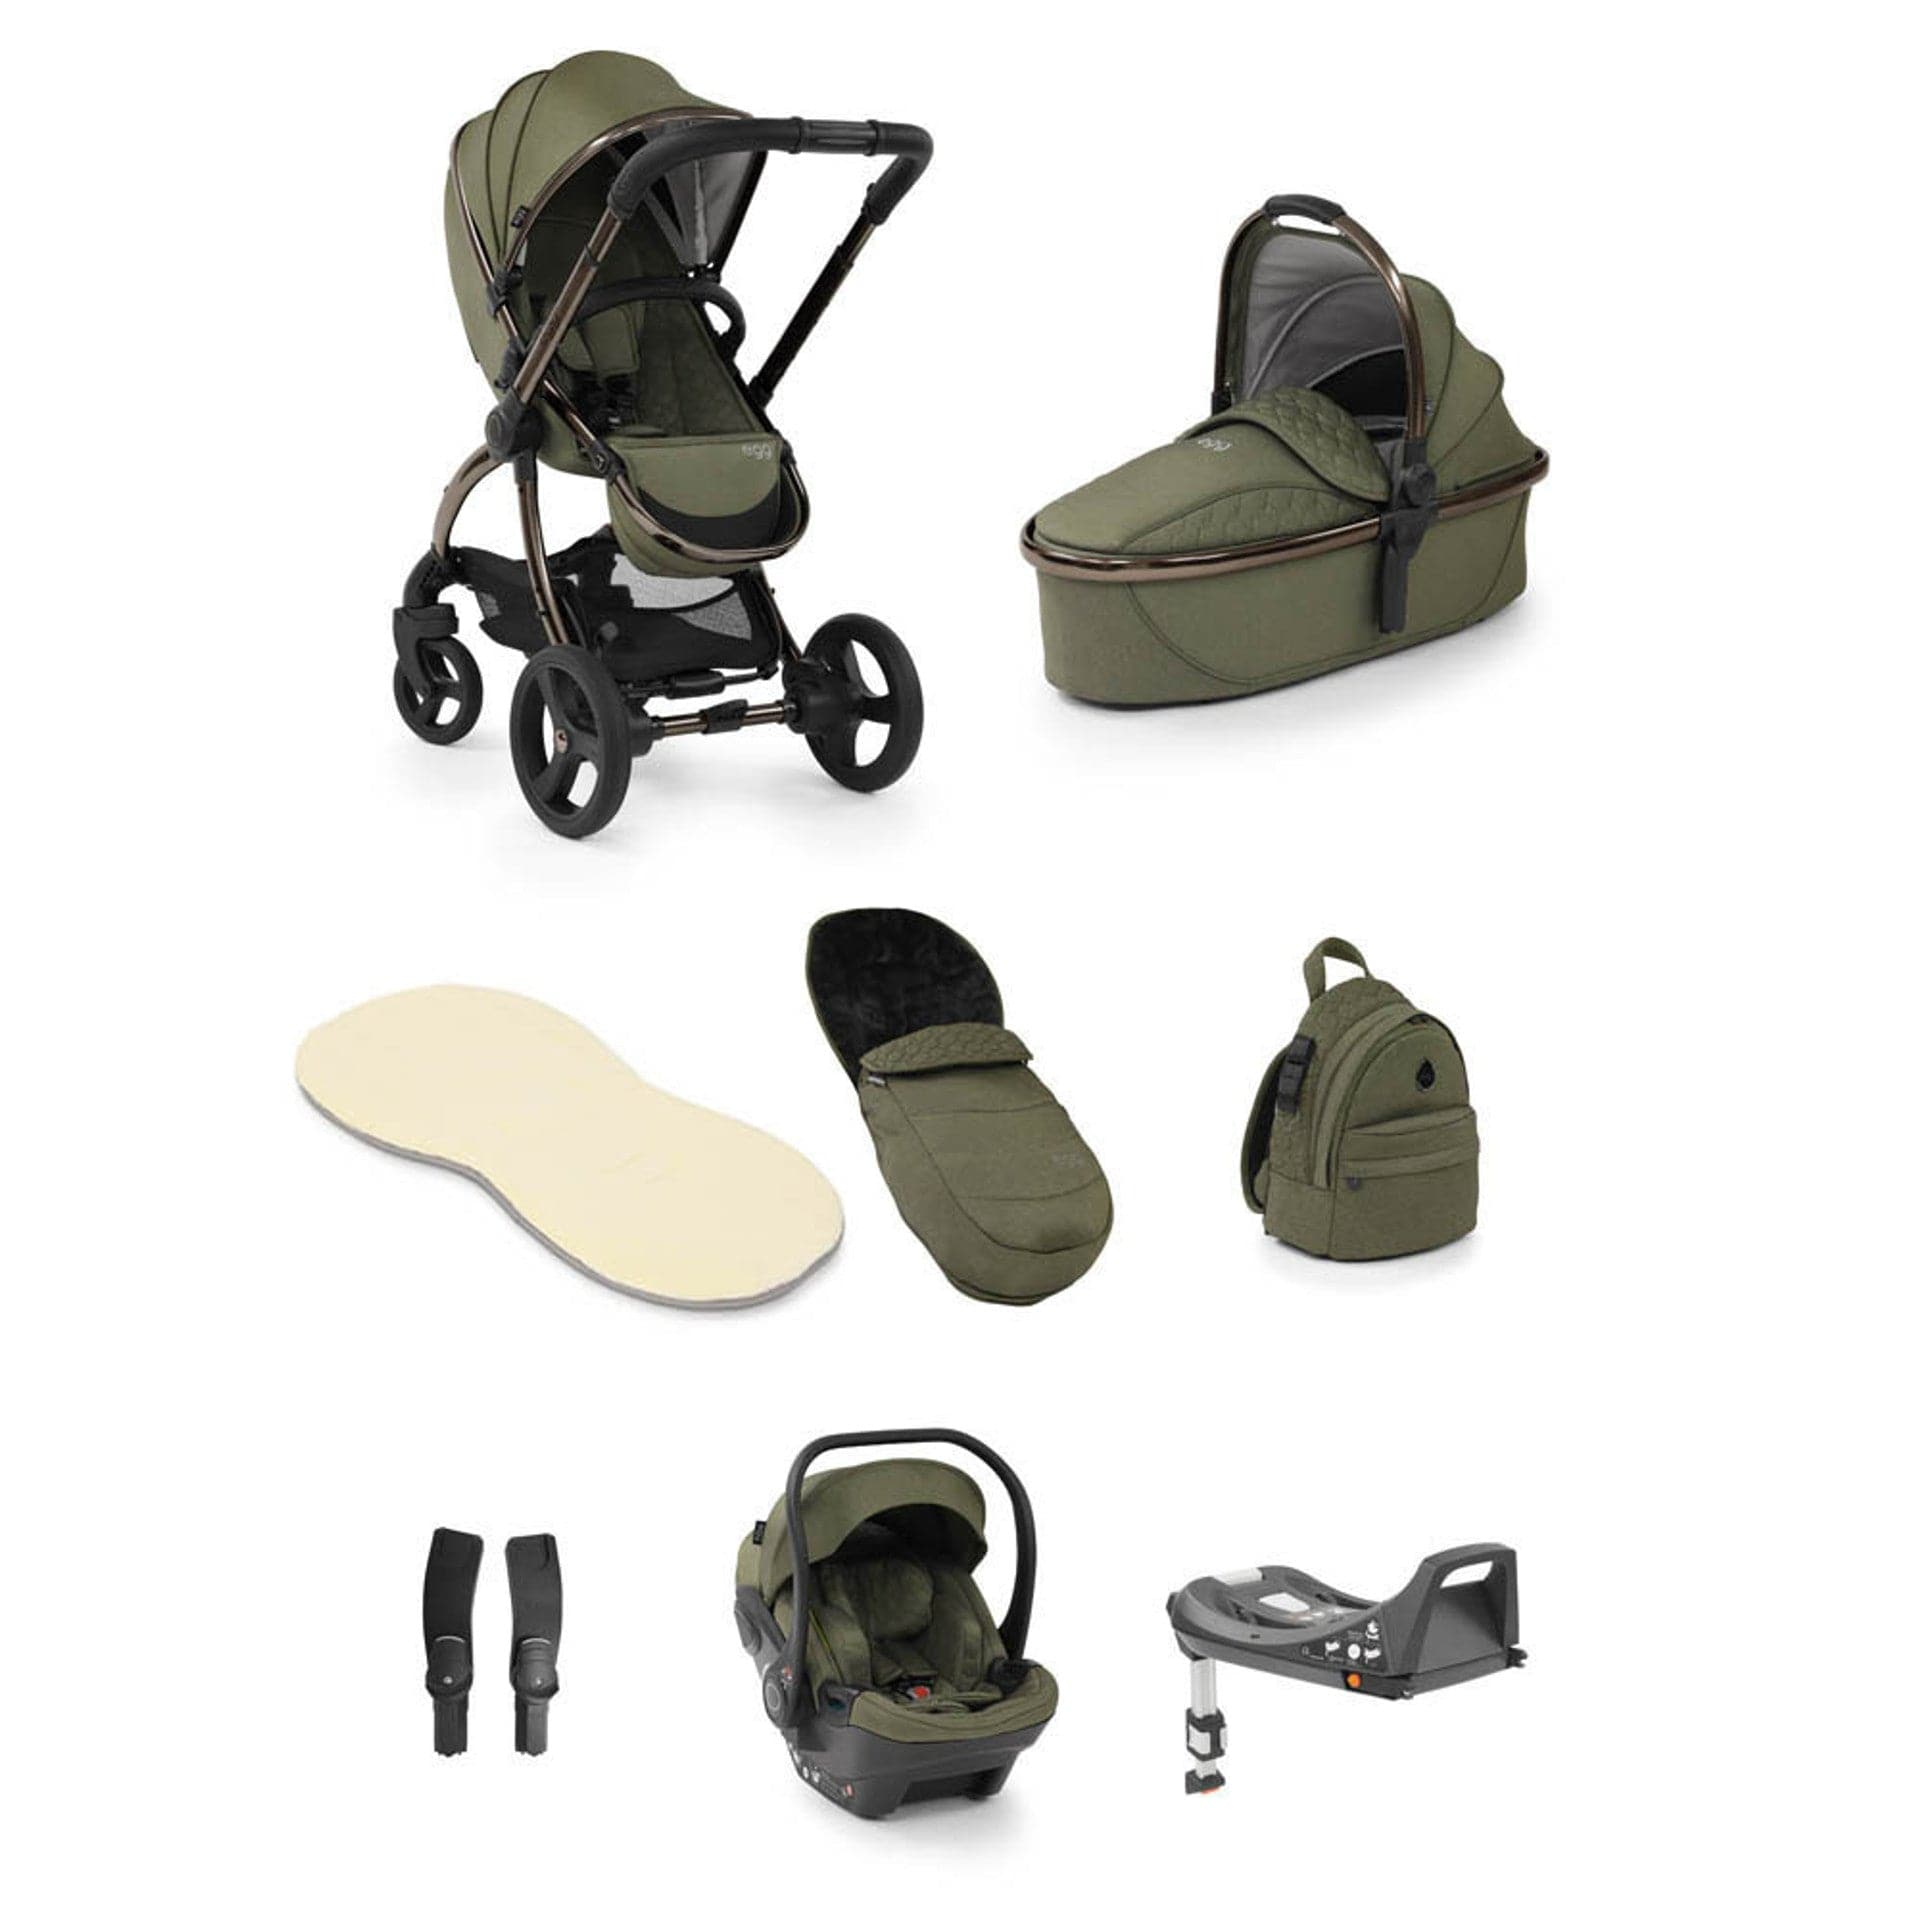 Egg® 2 Luxury Shell i-Size Travel System Bundle - Hunter Green - For Your Little One